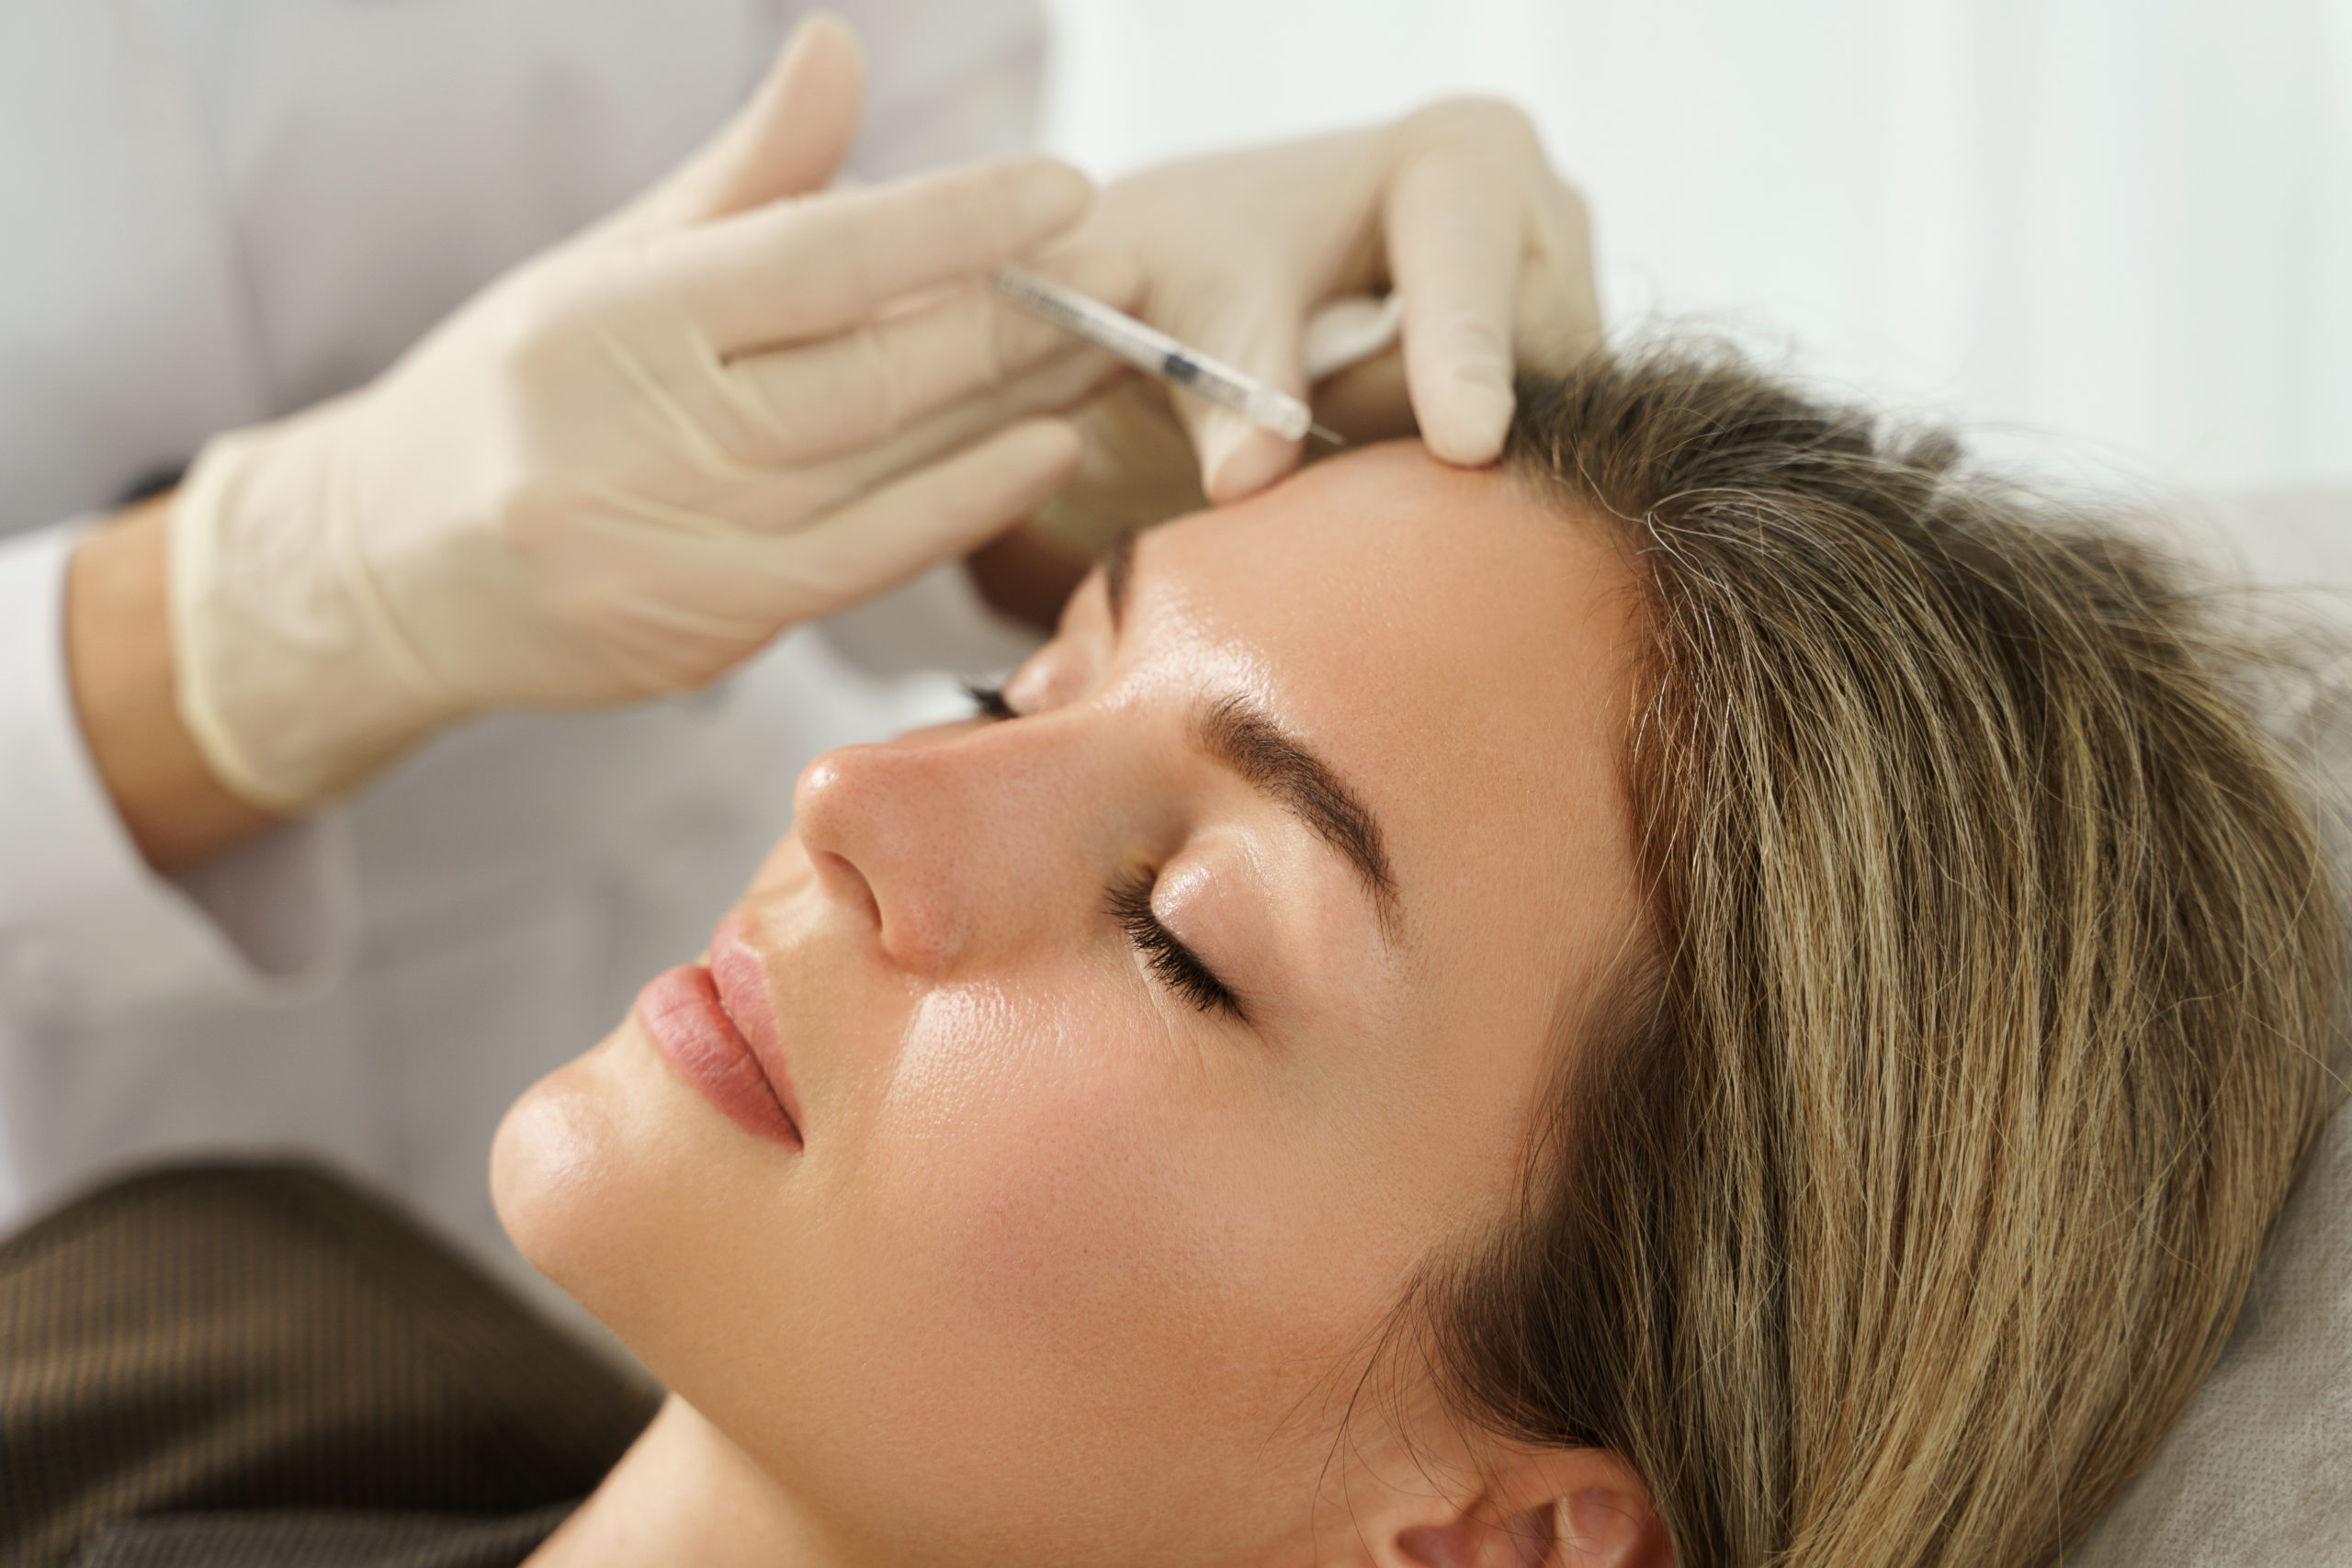 Dermal fillers | McGuire Anesthesia | Marco Island, Florida